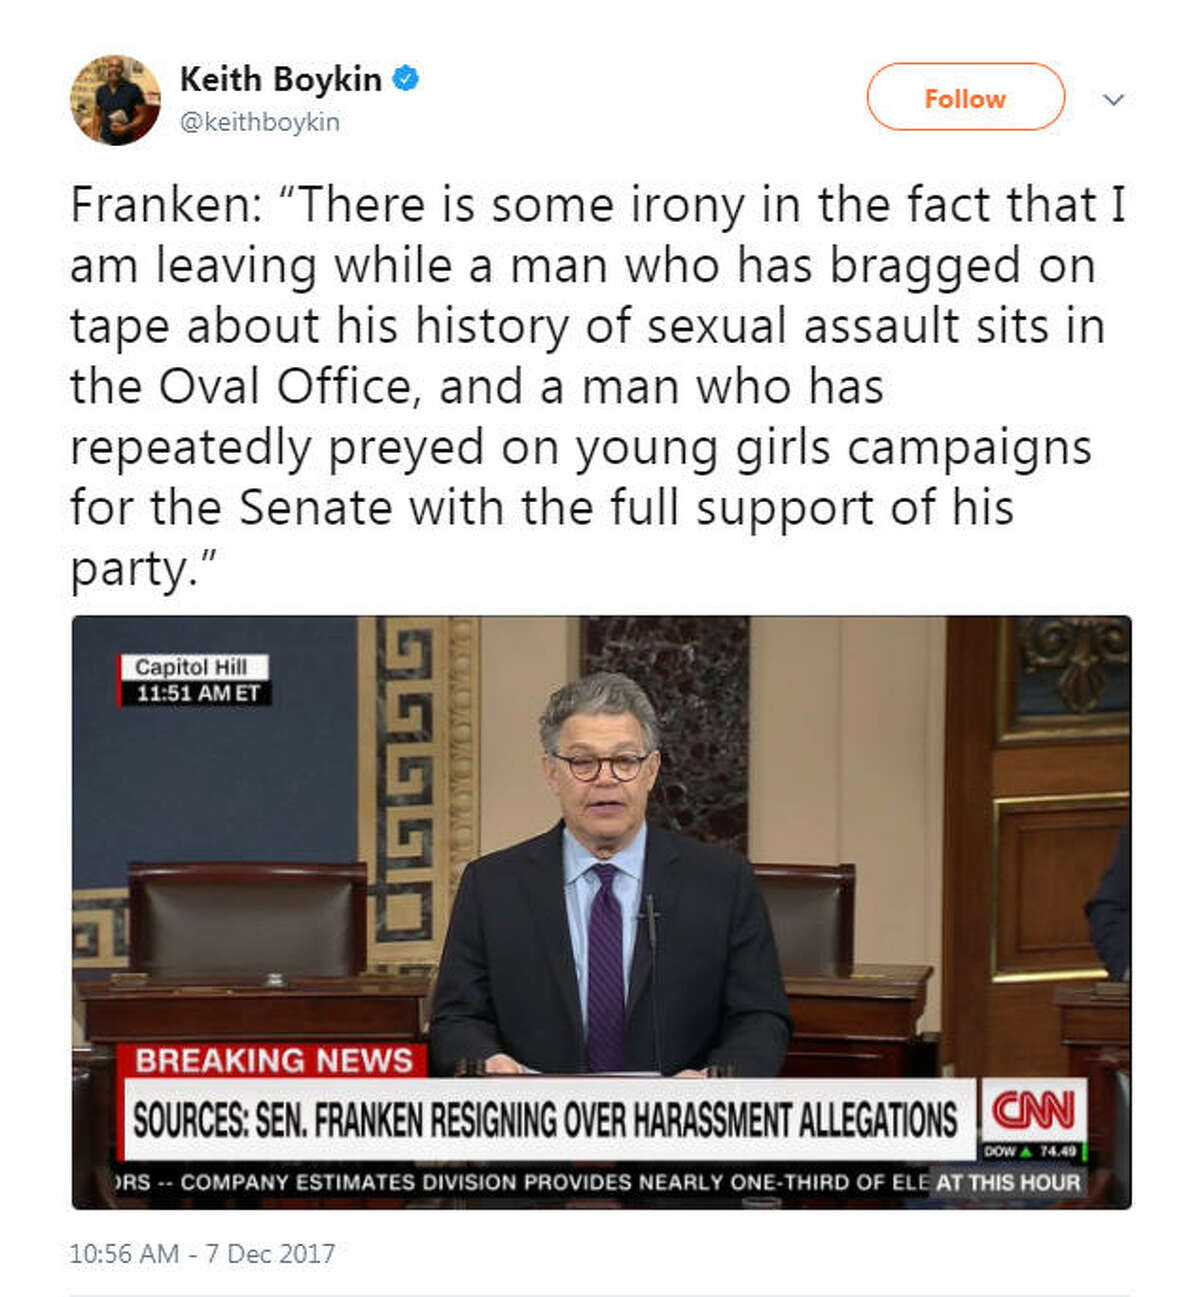 "Franken: 'There is some irony in the fact that I am leaving while a man who has bragged on tape about his history of sexual assault sits in the Oval Office, and a man who has repeatedly preyed on young girls campaigns for the Senate with the full support of his party.'" Source: Twitter